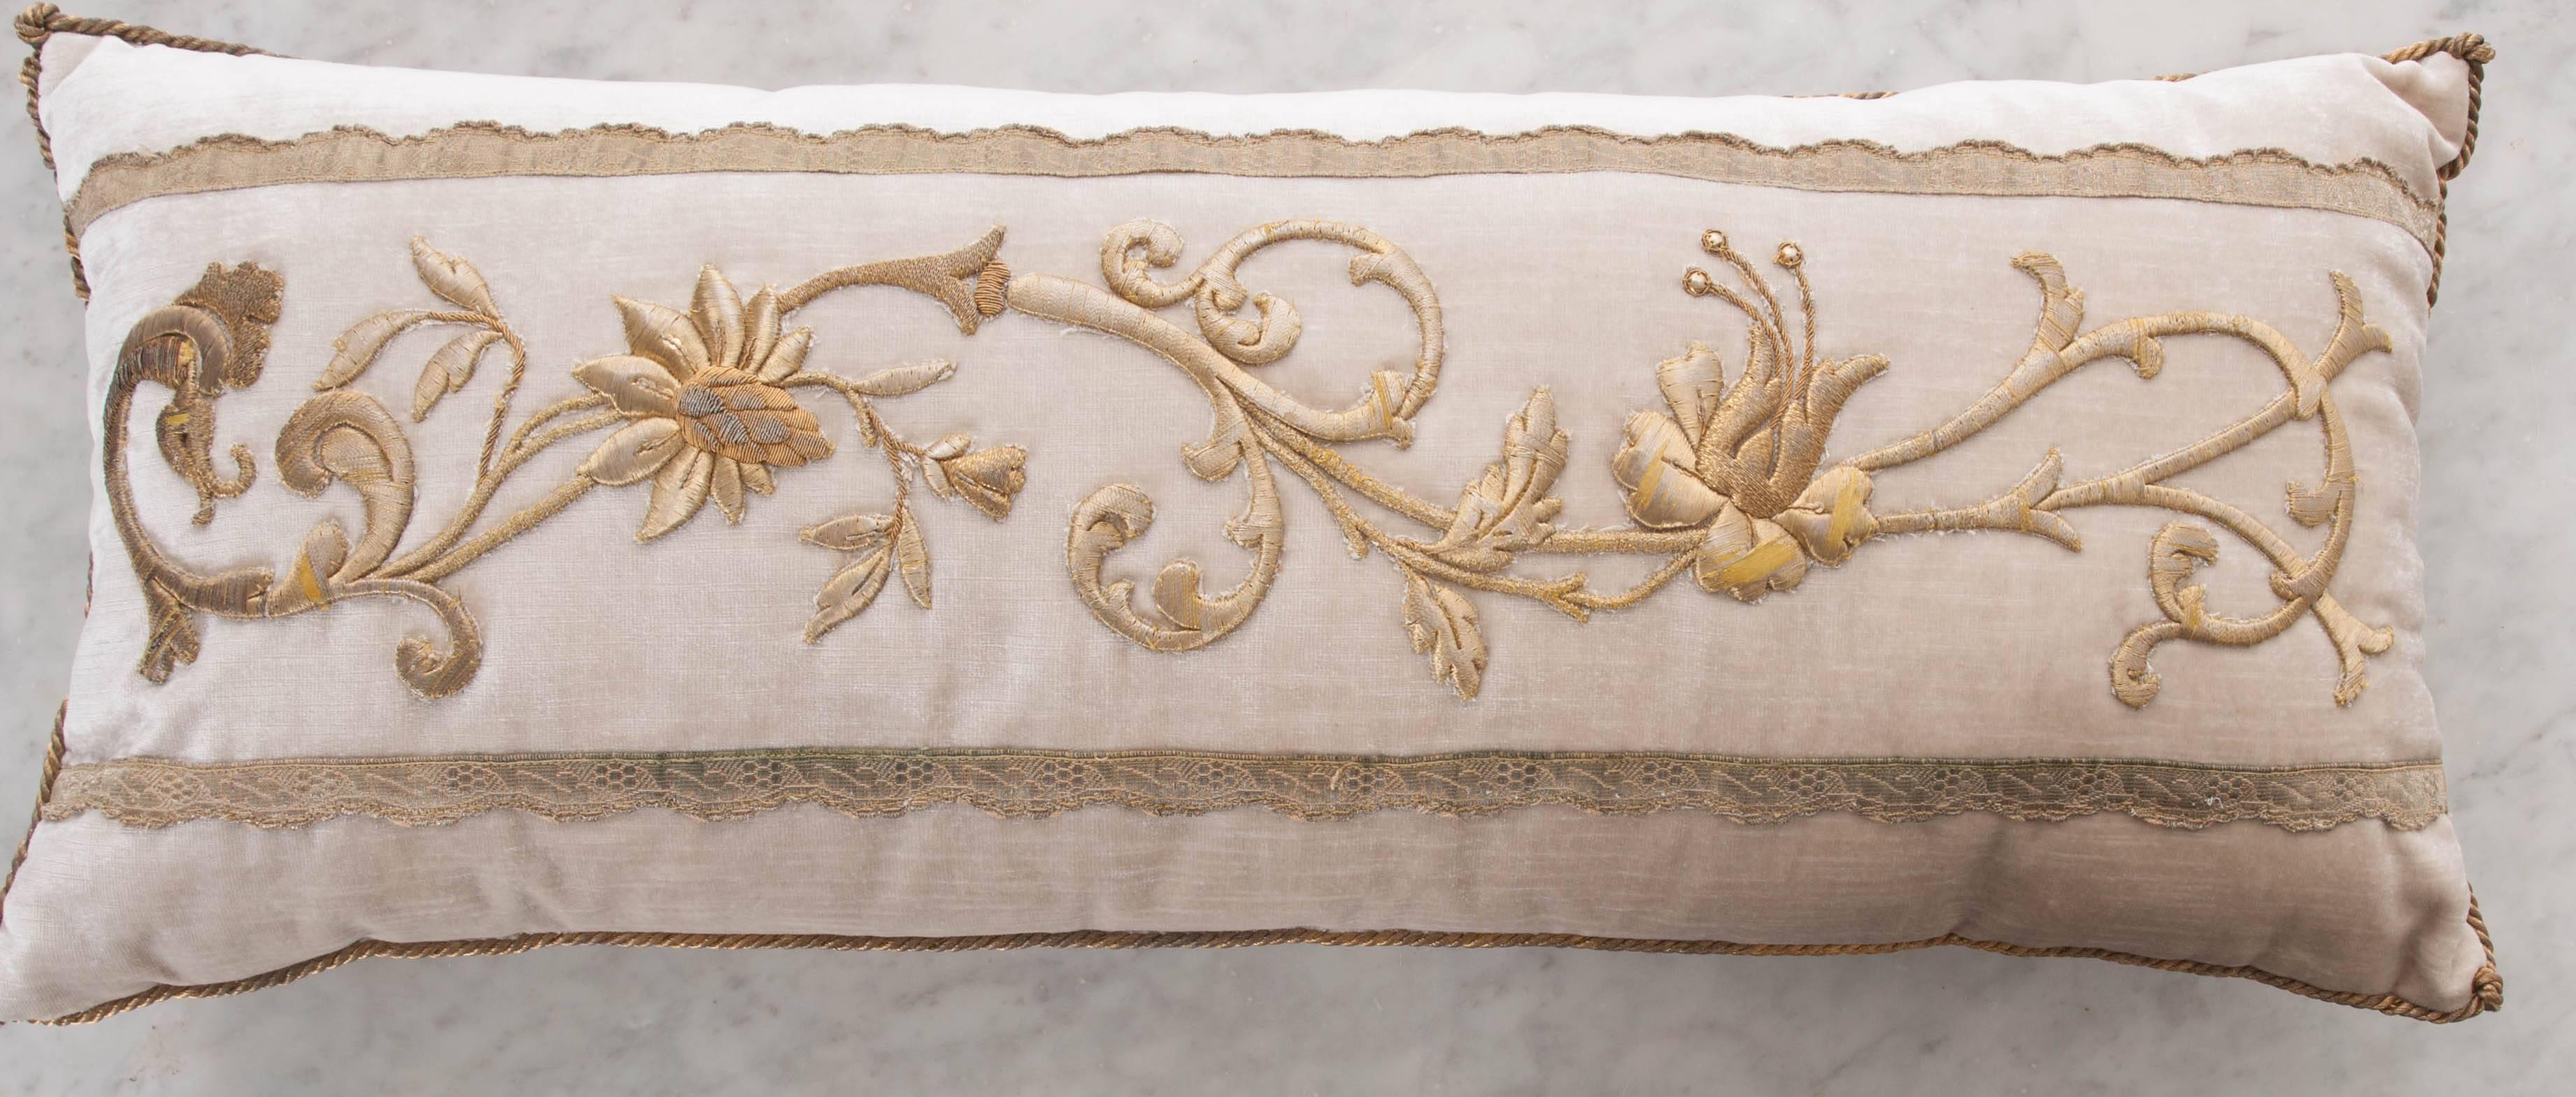 Antique European raised gold metallic embroidery of vining flowers and scrollwork with antique semi serpentine gold metallic galon on oyster velvet. Hand trimmed with gold metallic cording knotted in the corners.